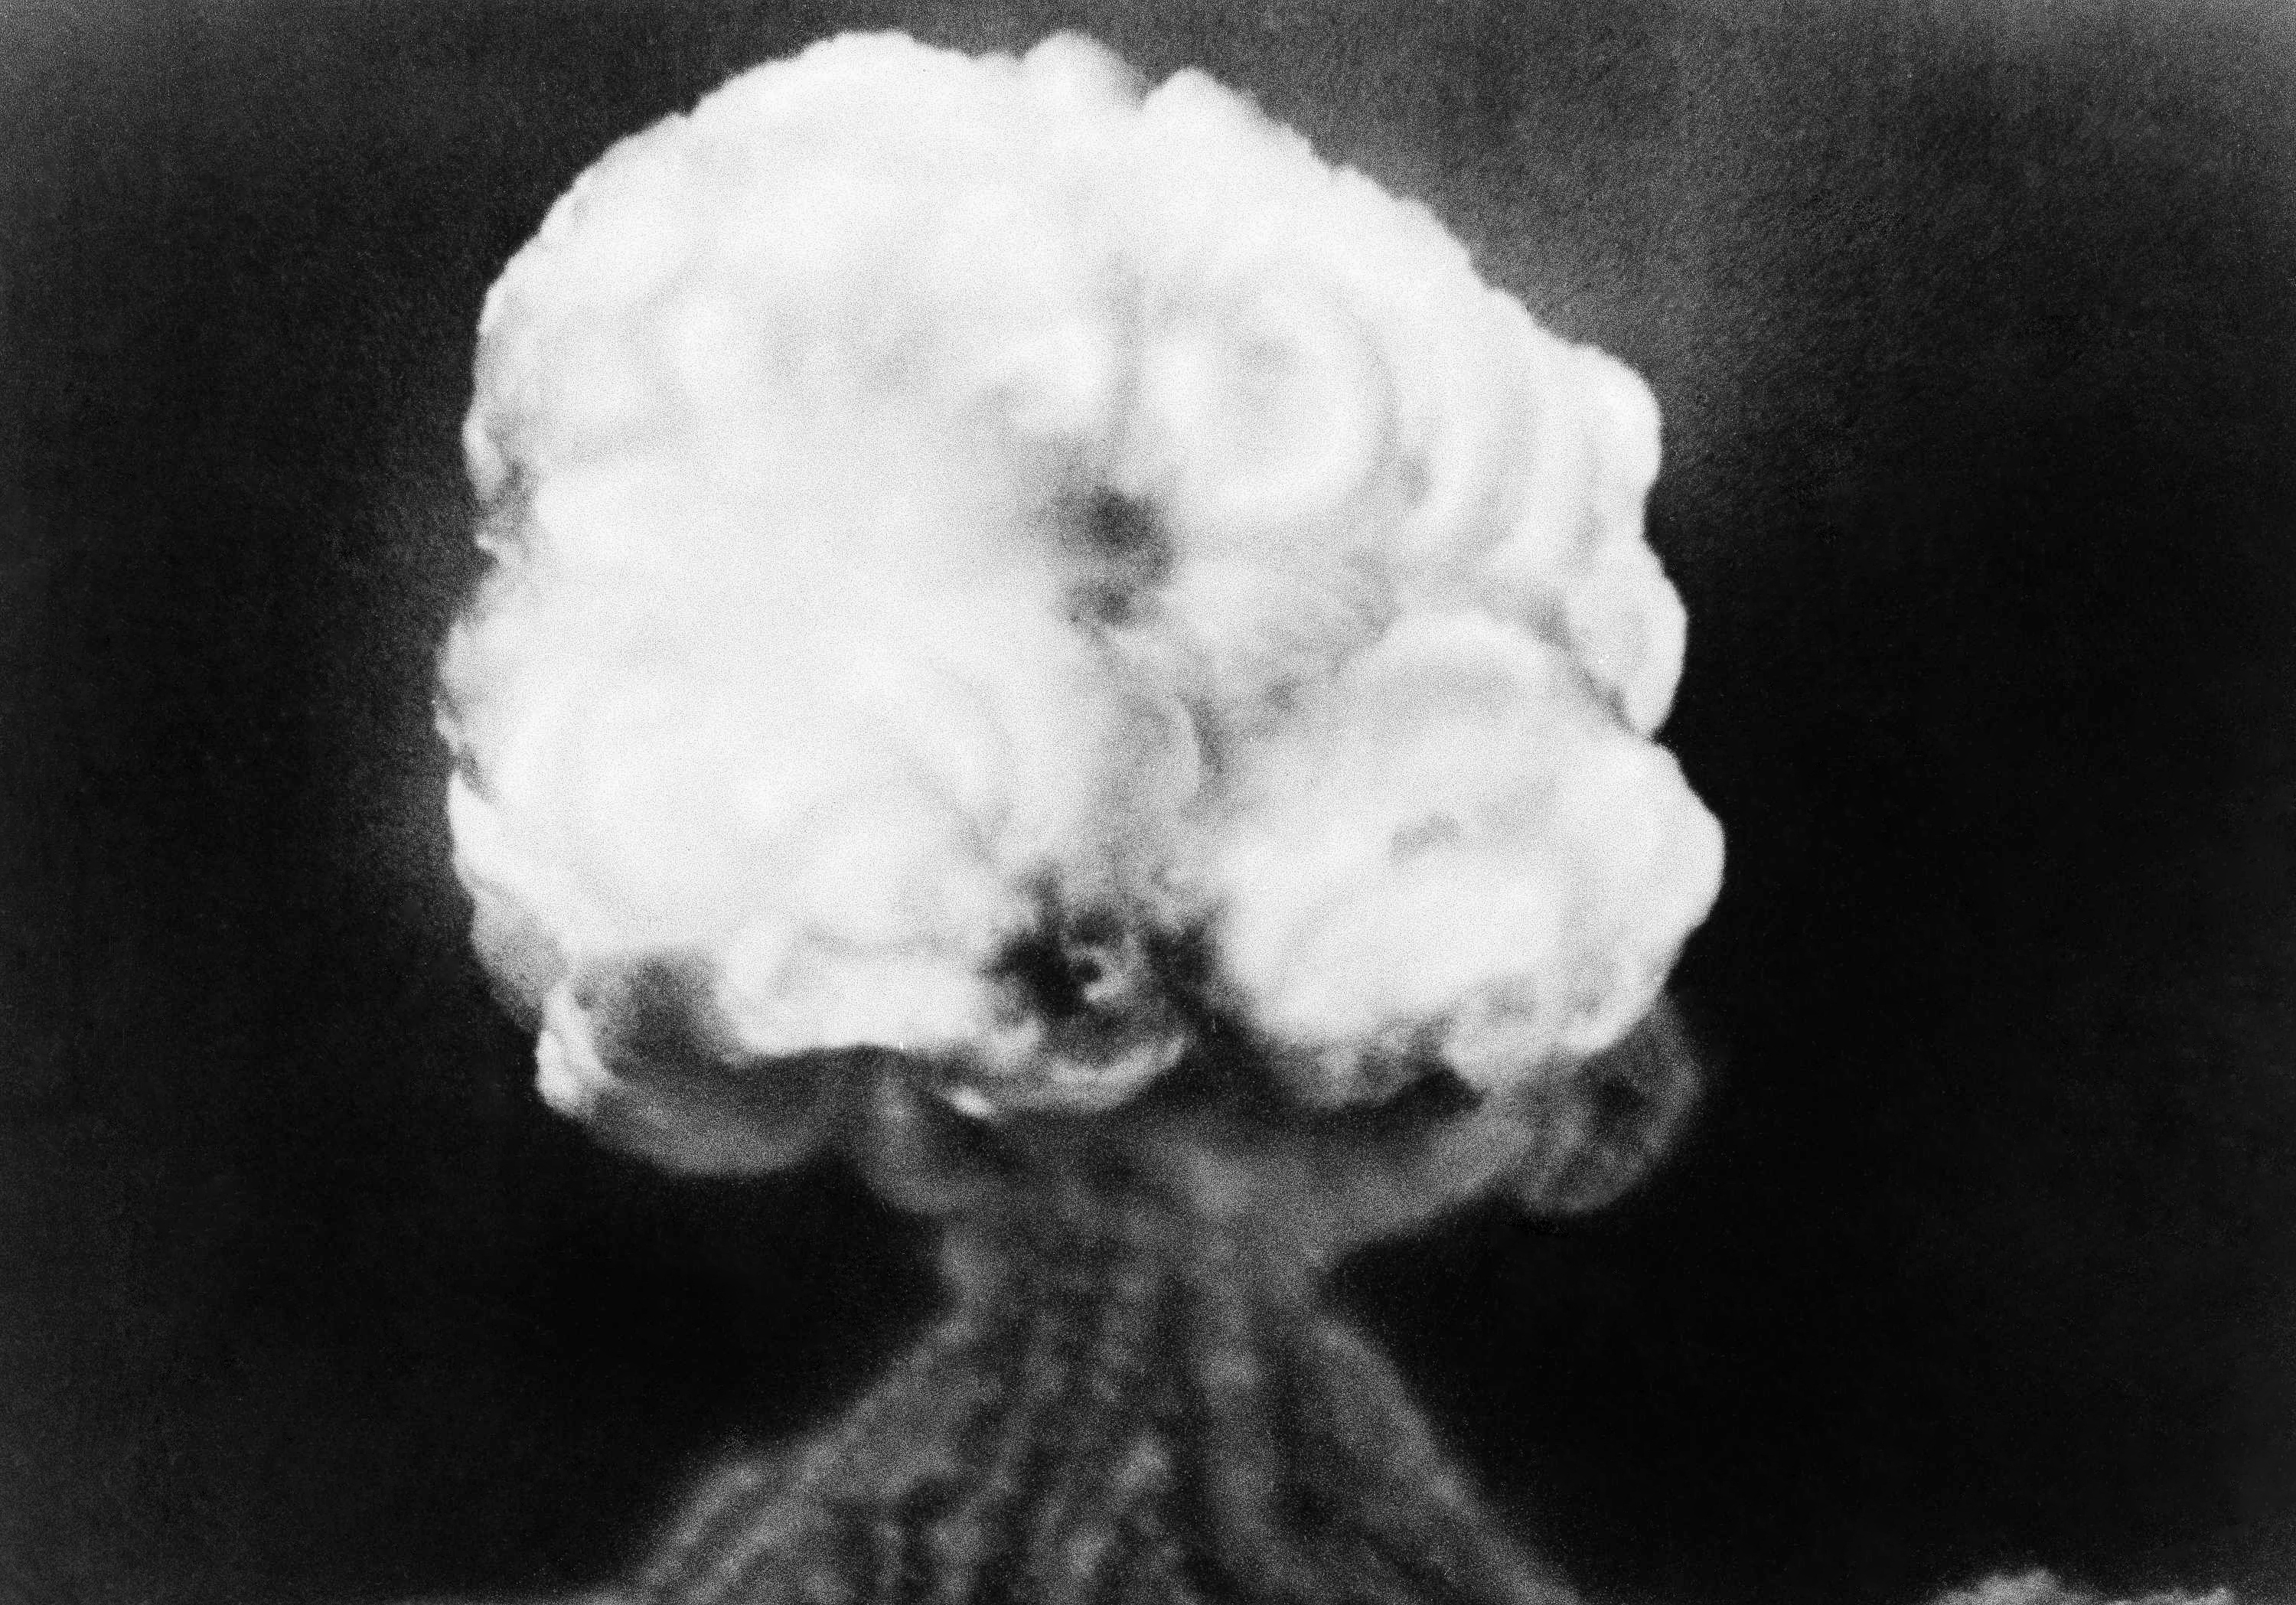 This is the mushroom cloud of the first atomic explosion at Trinity Test Site, New Mexico on July 16, 1945.  It left a half-mile wide crater, ten feet deep at the vent and the sand within the crater had been burned and boiled into a highly radioactive, jade-green, glassy crust. (AP)